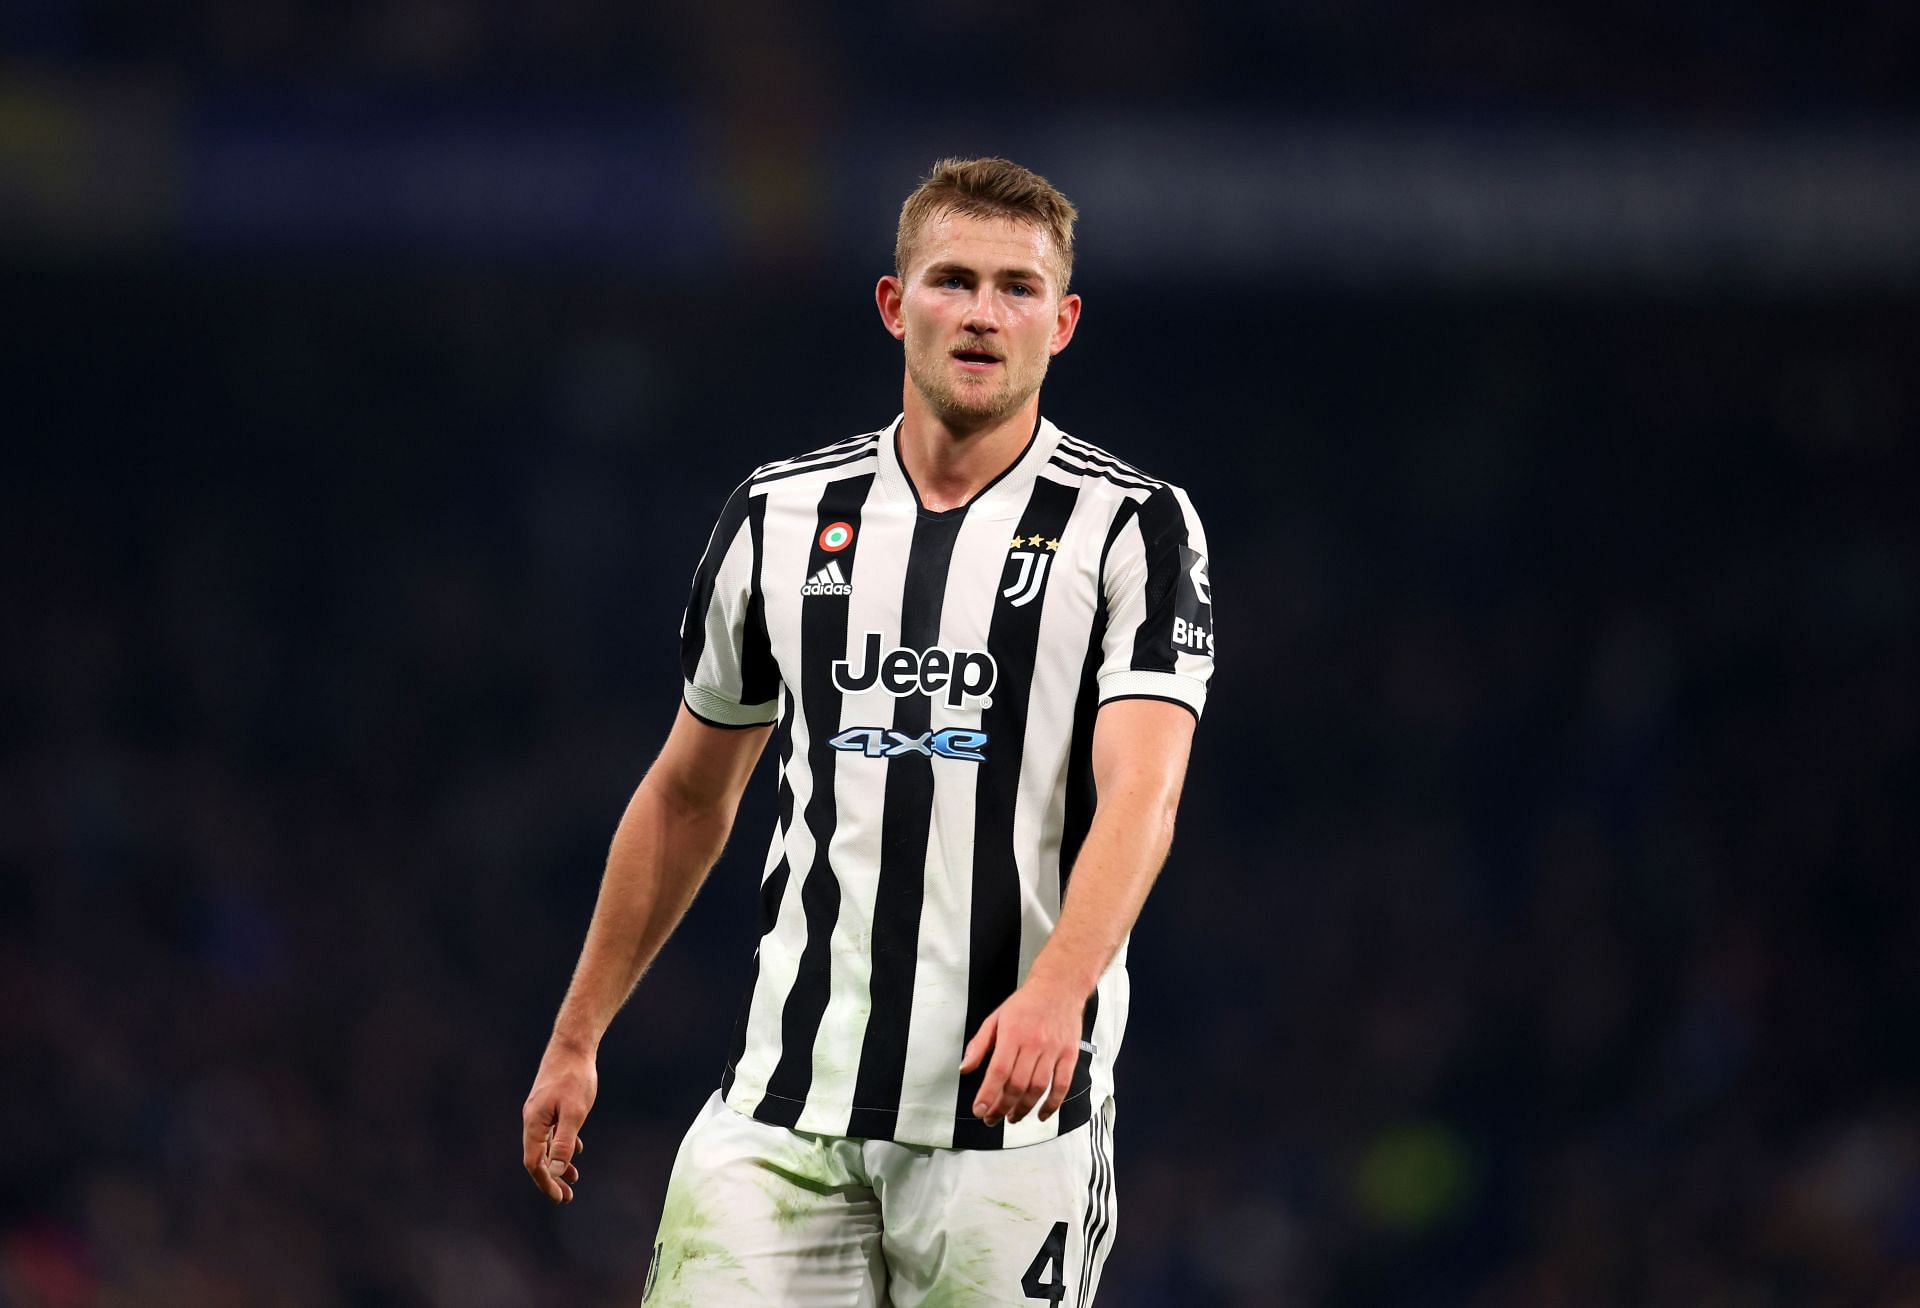 Matthijs de Ligt is the most well-paid player in the Italian top flight at the moment.